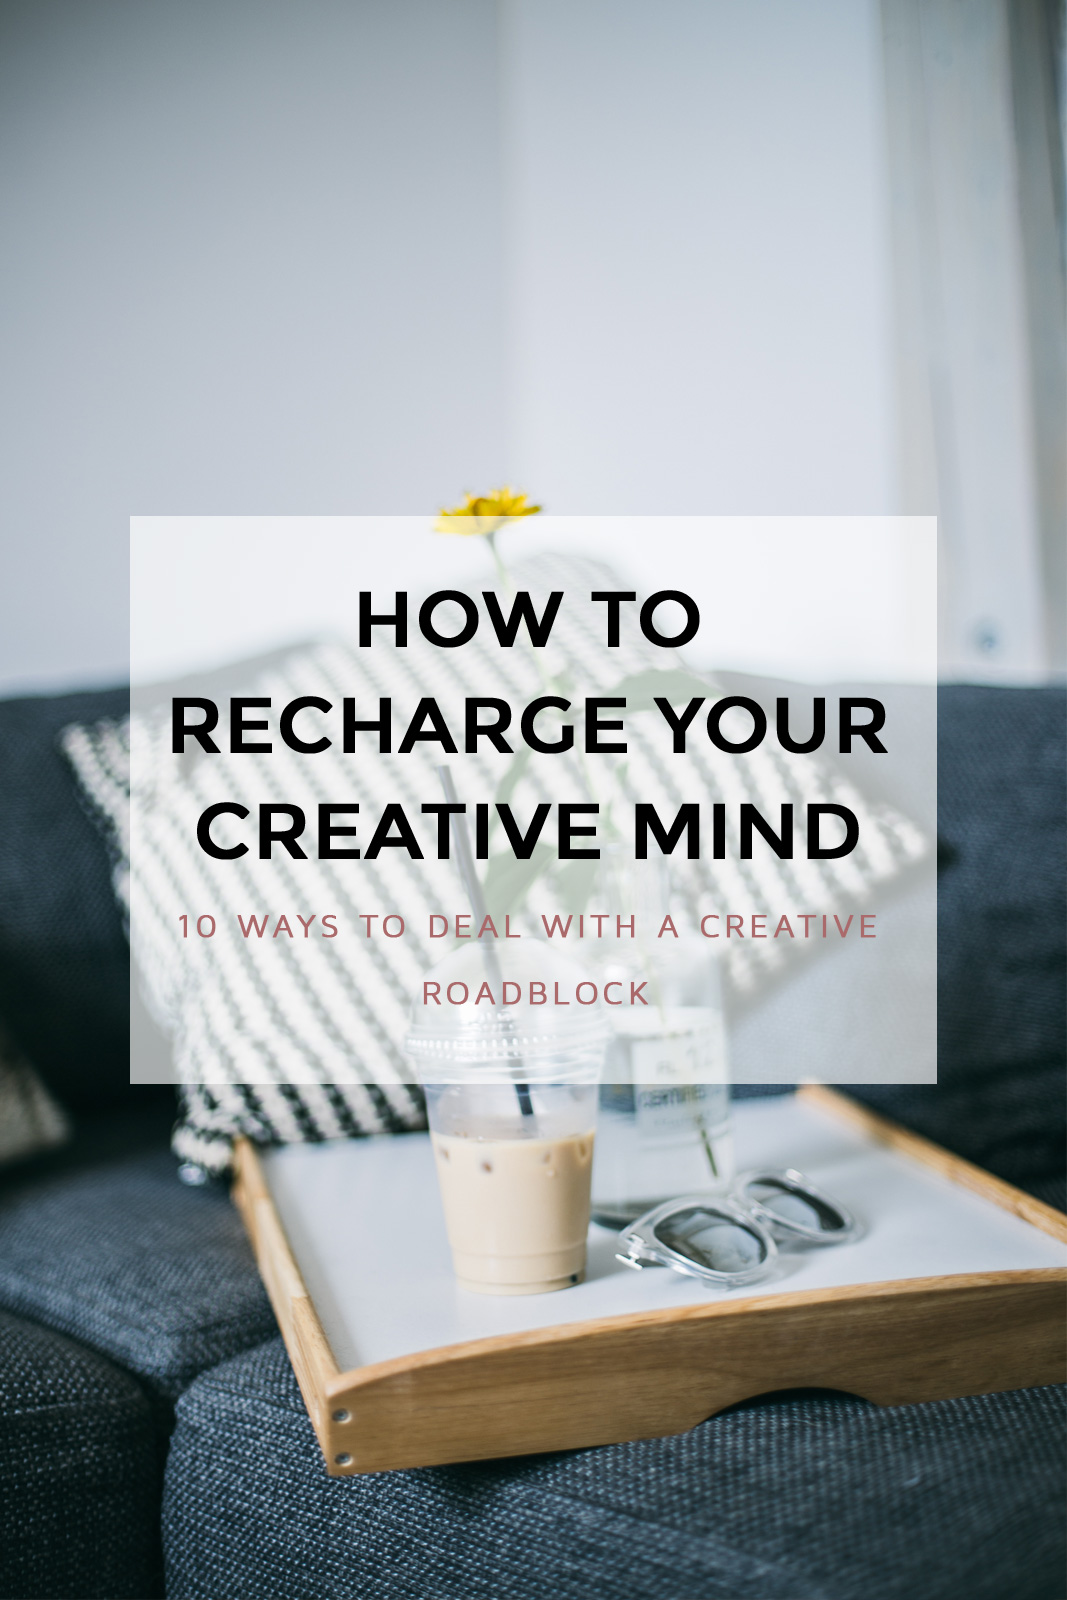 Last week I had a serious burnout. I was travelling, spending time with my loved ones & I seriously simply didn't feel like blogging. I haven't felt this way in YEARS. I just knew- the time has come to recharge my mind in order to keep going. Click through to find out my top tips for dealing with creative block! (blogging tips, blog tips, blogging for money, blogger tips, blogging tricks, creative entrepreneur tips, full time blogging)